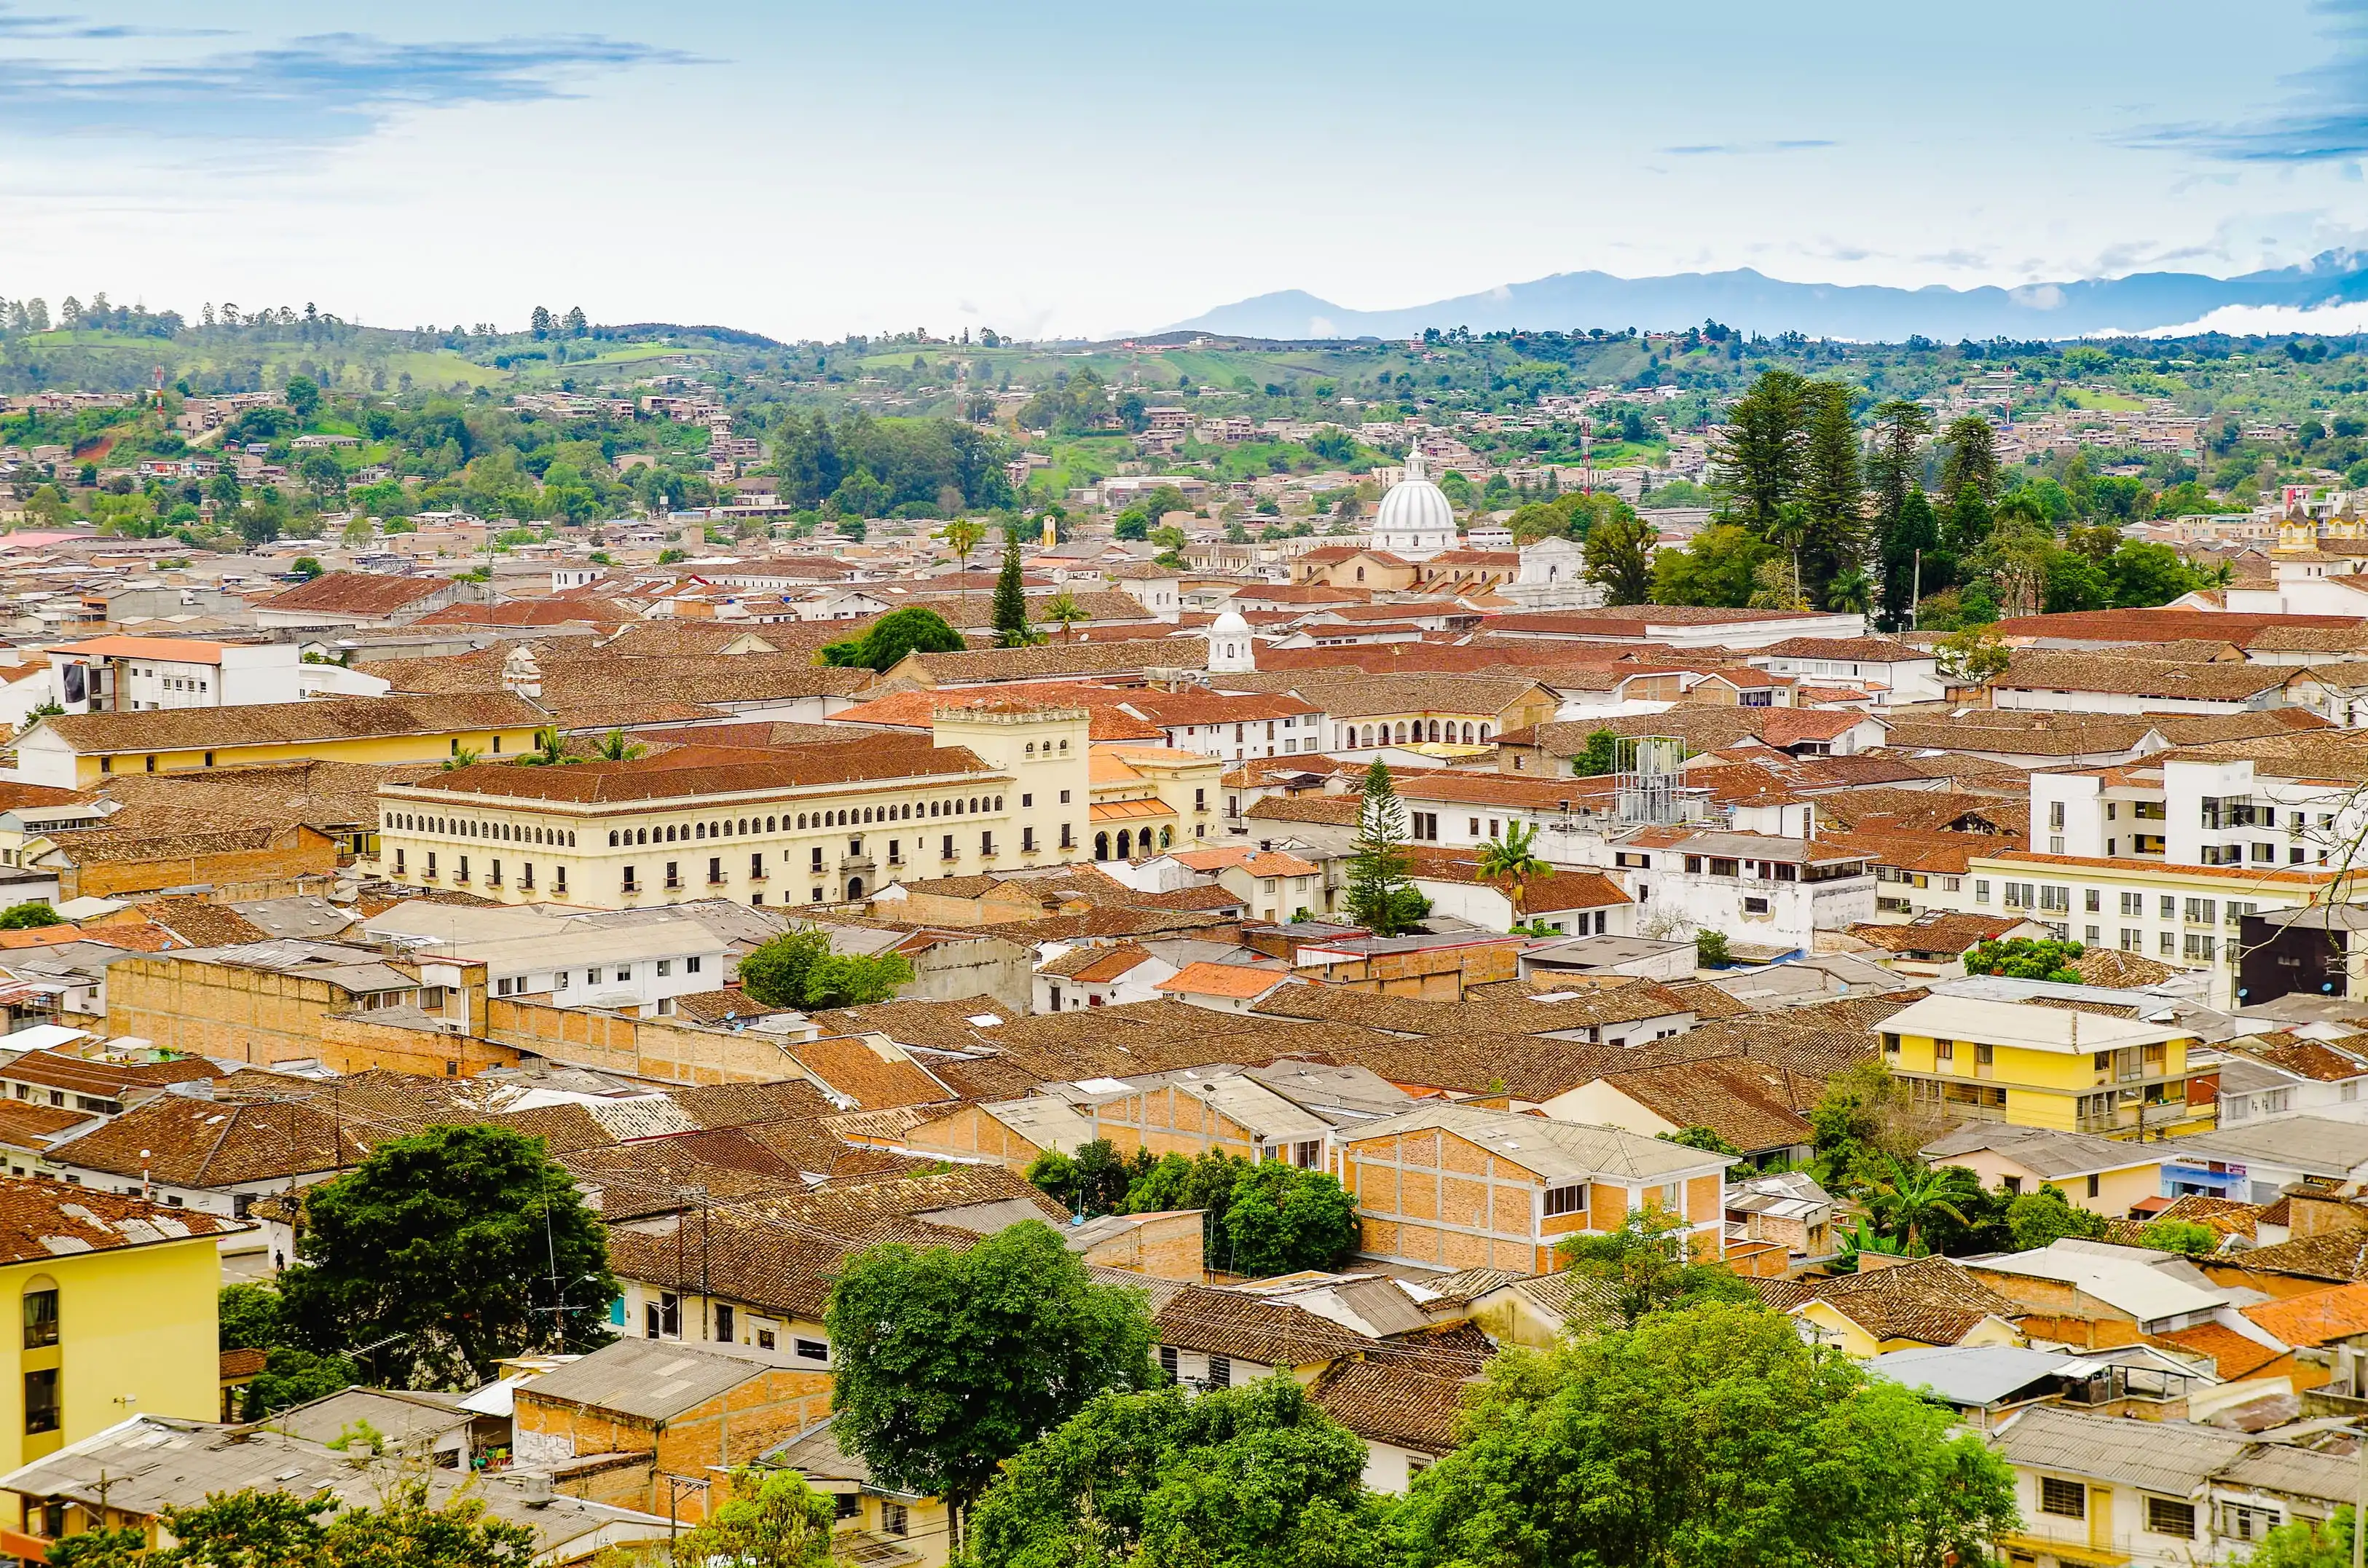 Above view of the city of Popayan located in the center of the department of Cauca. It's called the White City because most of the houses are painted white